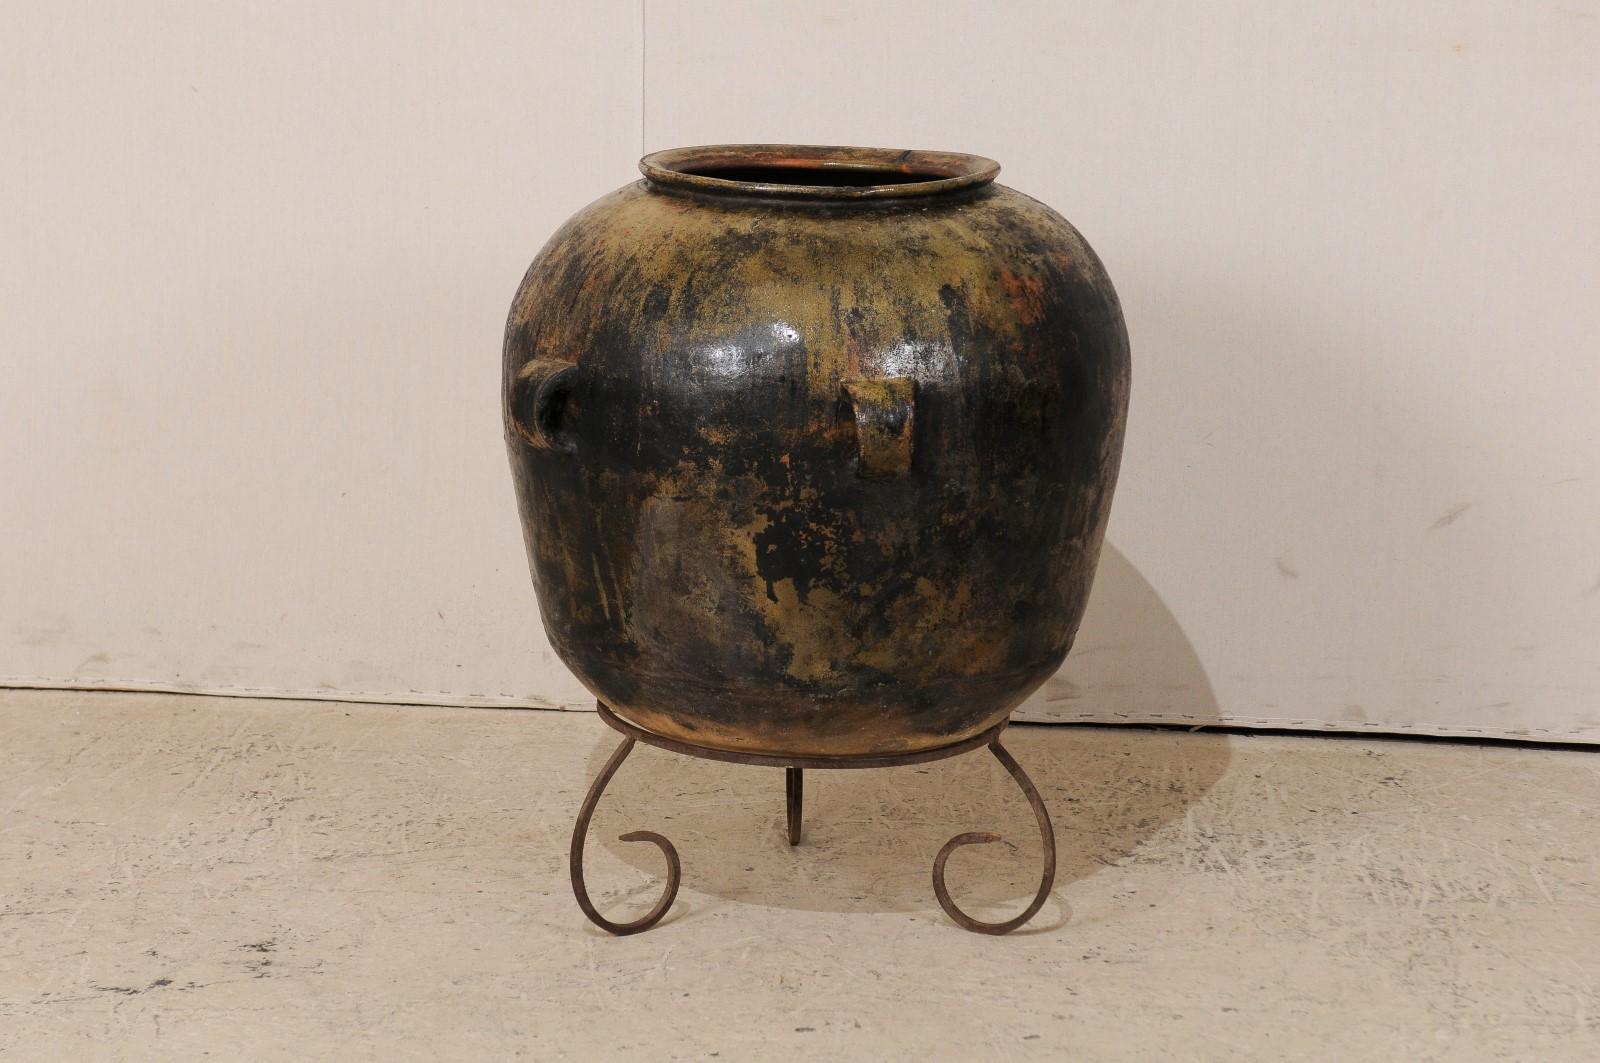 A Guatemalan ceramic jar on stand. This Guatemalan jar, from the early 20th century, features a wide body, four handles, and has a nice patina with rich warm hues throughout. The jar is raised on a custom iron tripod base with scrolled feet.